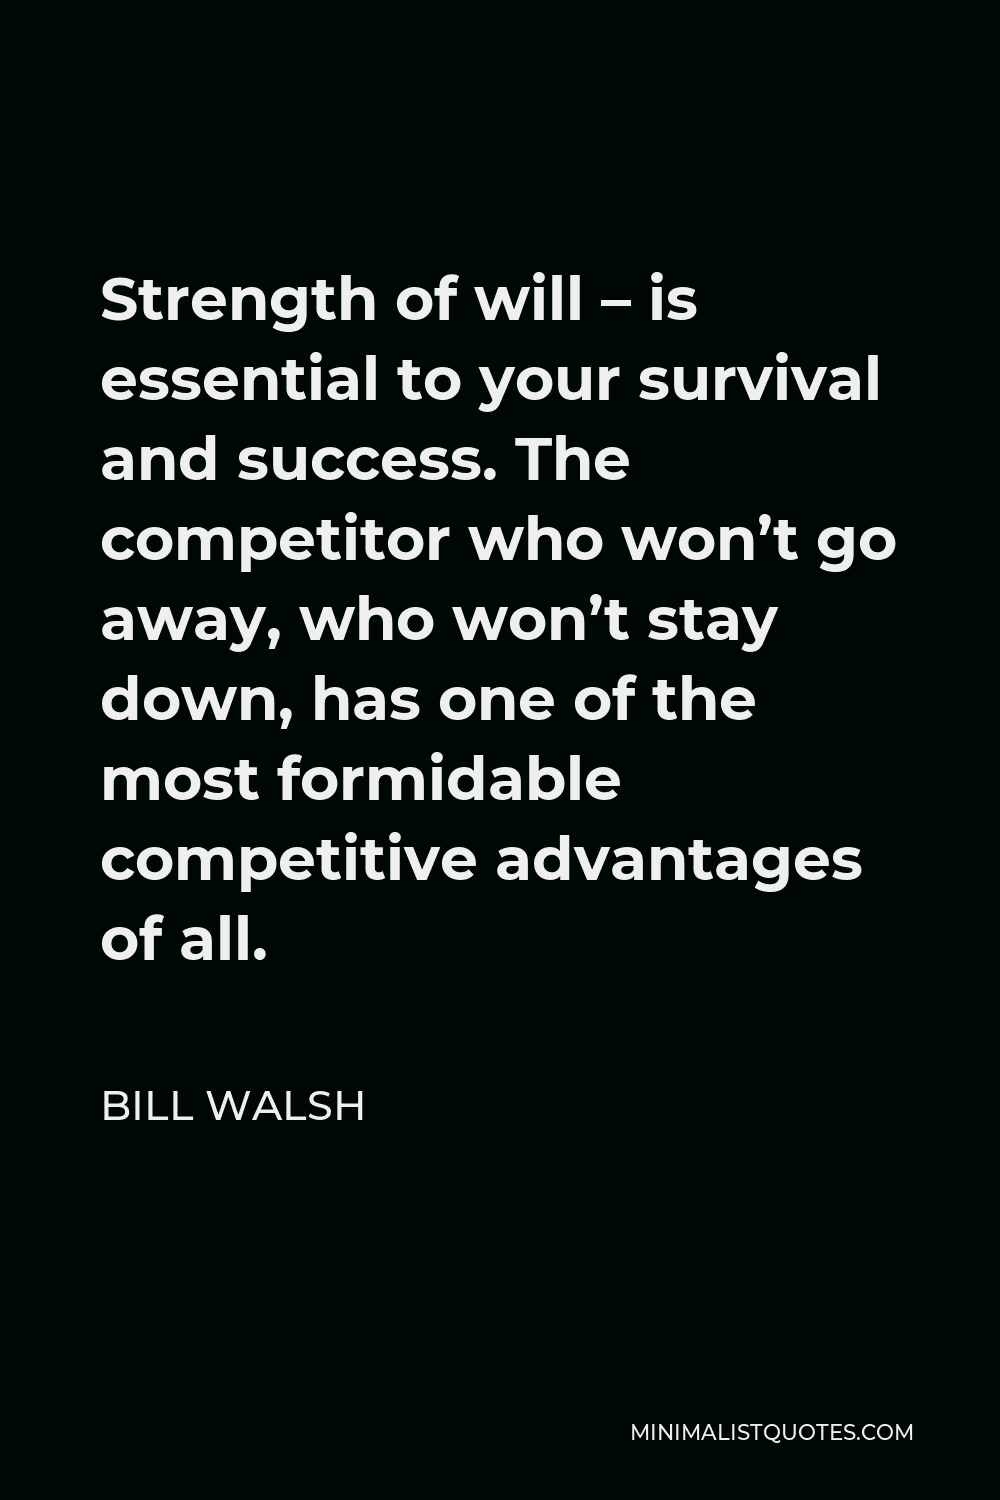 Bill Walsh Quote - Strength of will – is essential to your survival and success. The competitor who won’t go away, who won’t stay down, has one of the most formidable competitive advantages of all.